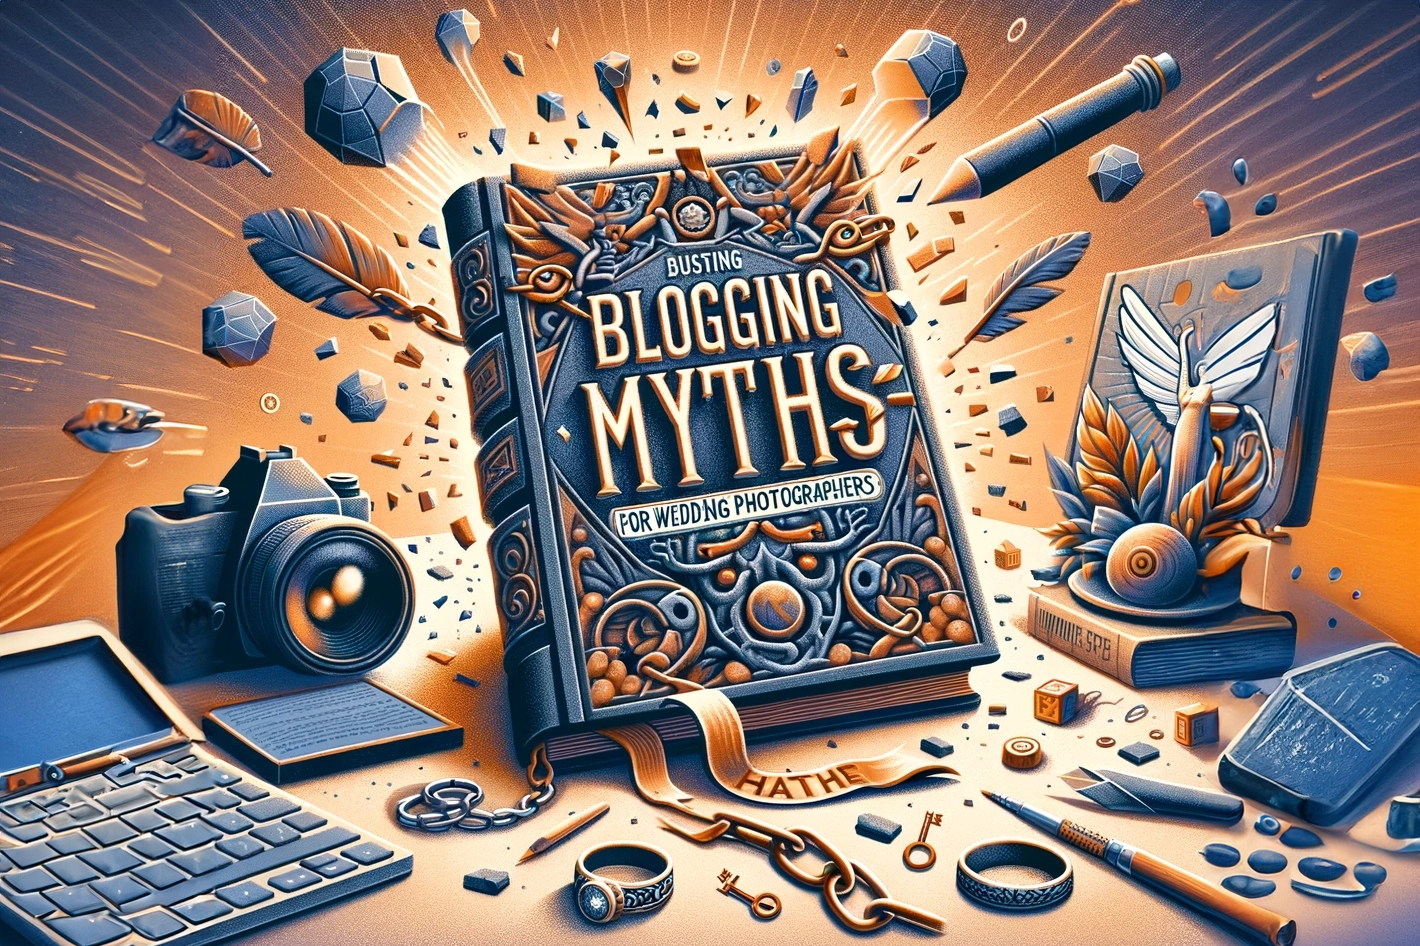 A book of blogging myths from SEO for wedding photographers.